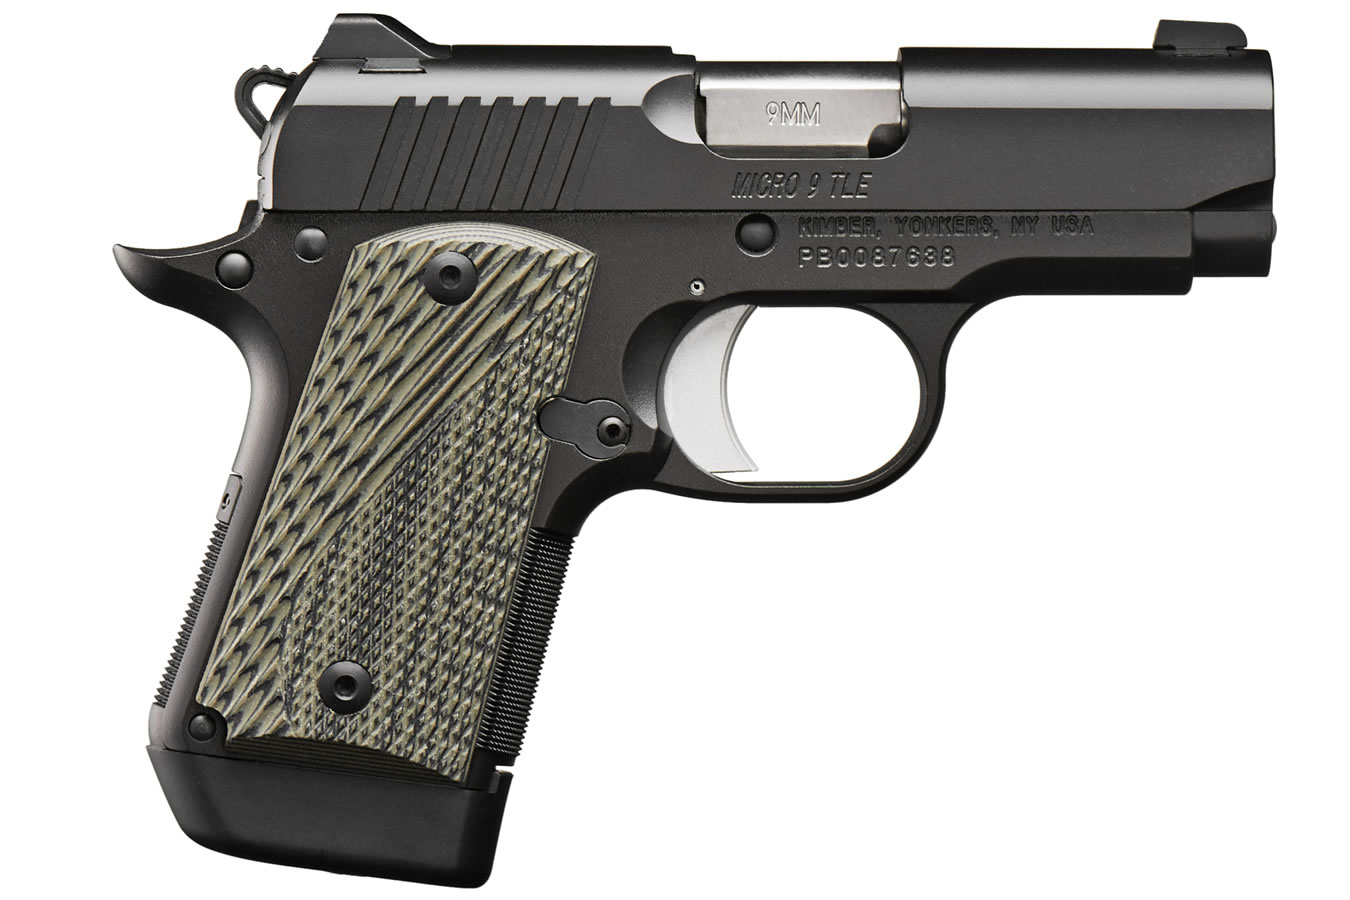 KIMBER MICRO 9 TLE 9MM WITH NIGHT SIGHTS